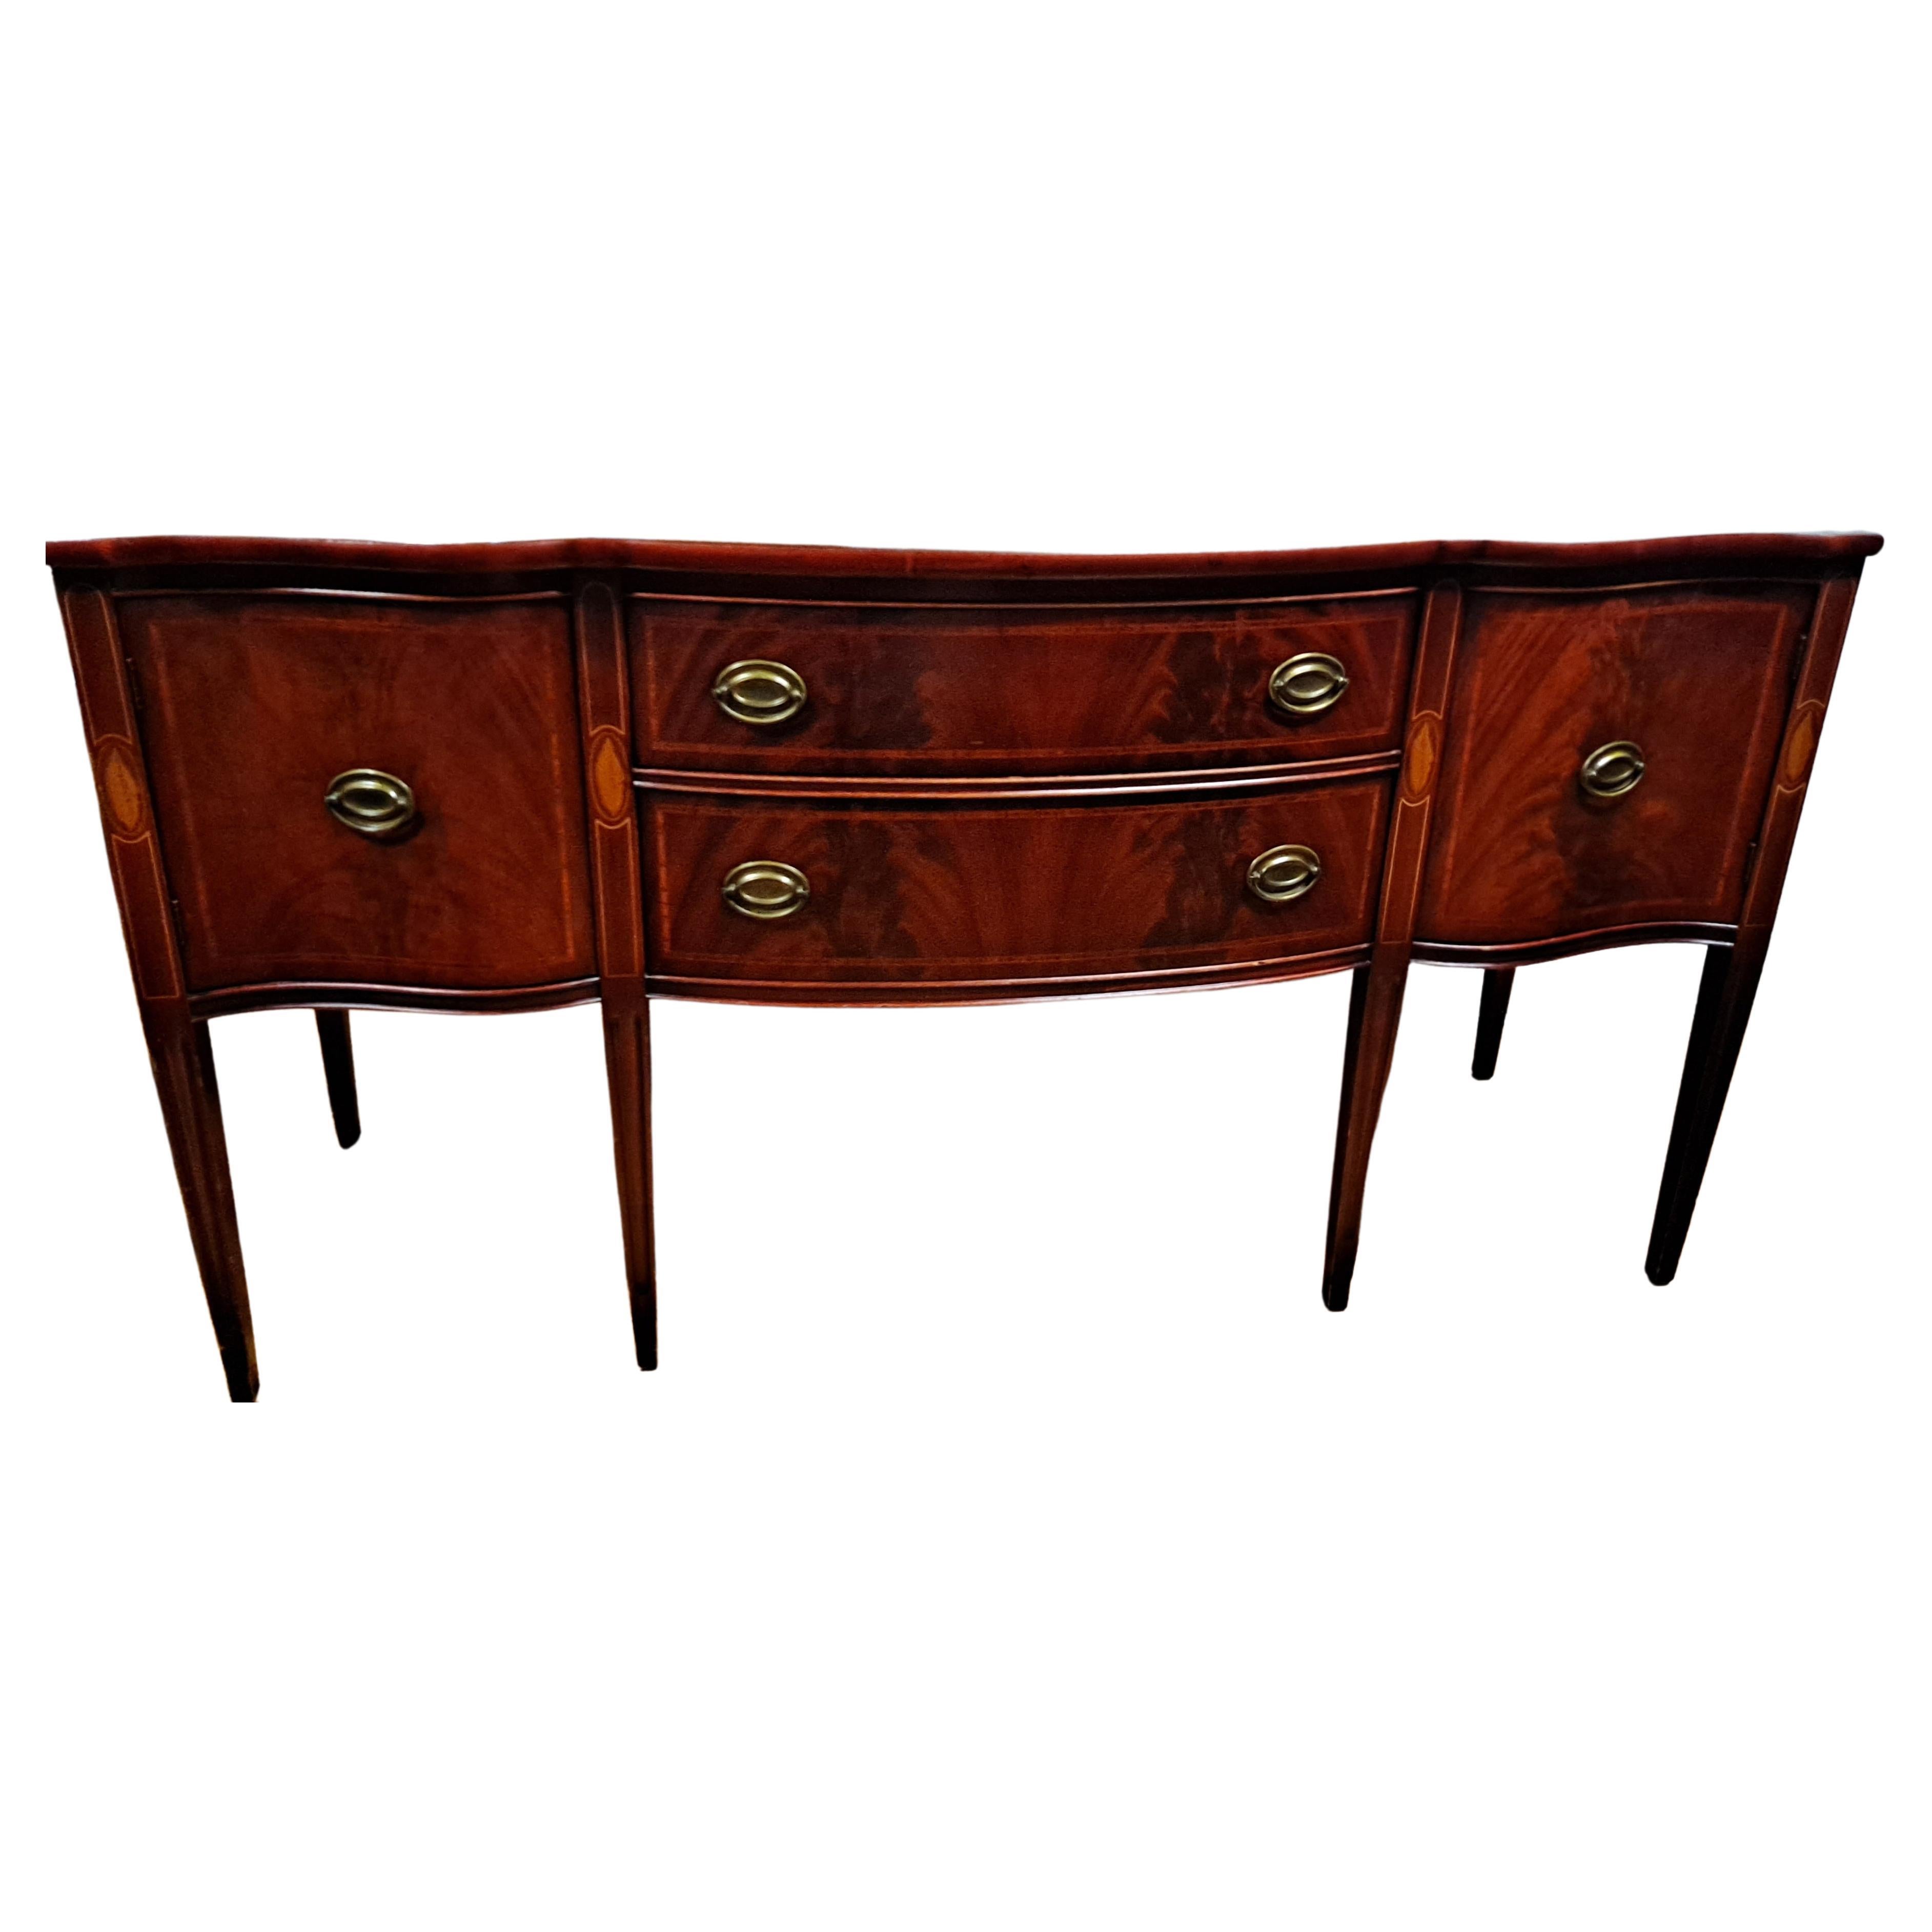 20th Century Federal Style Serpentine Front Mahogany Sideboard